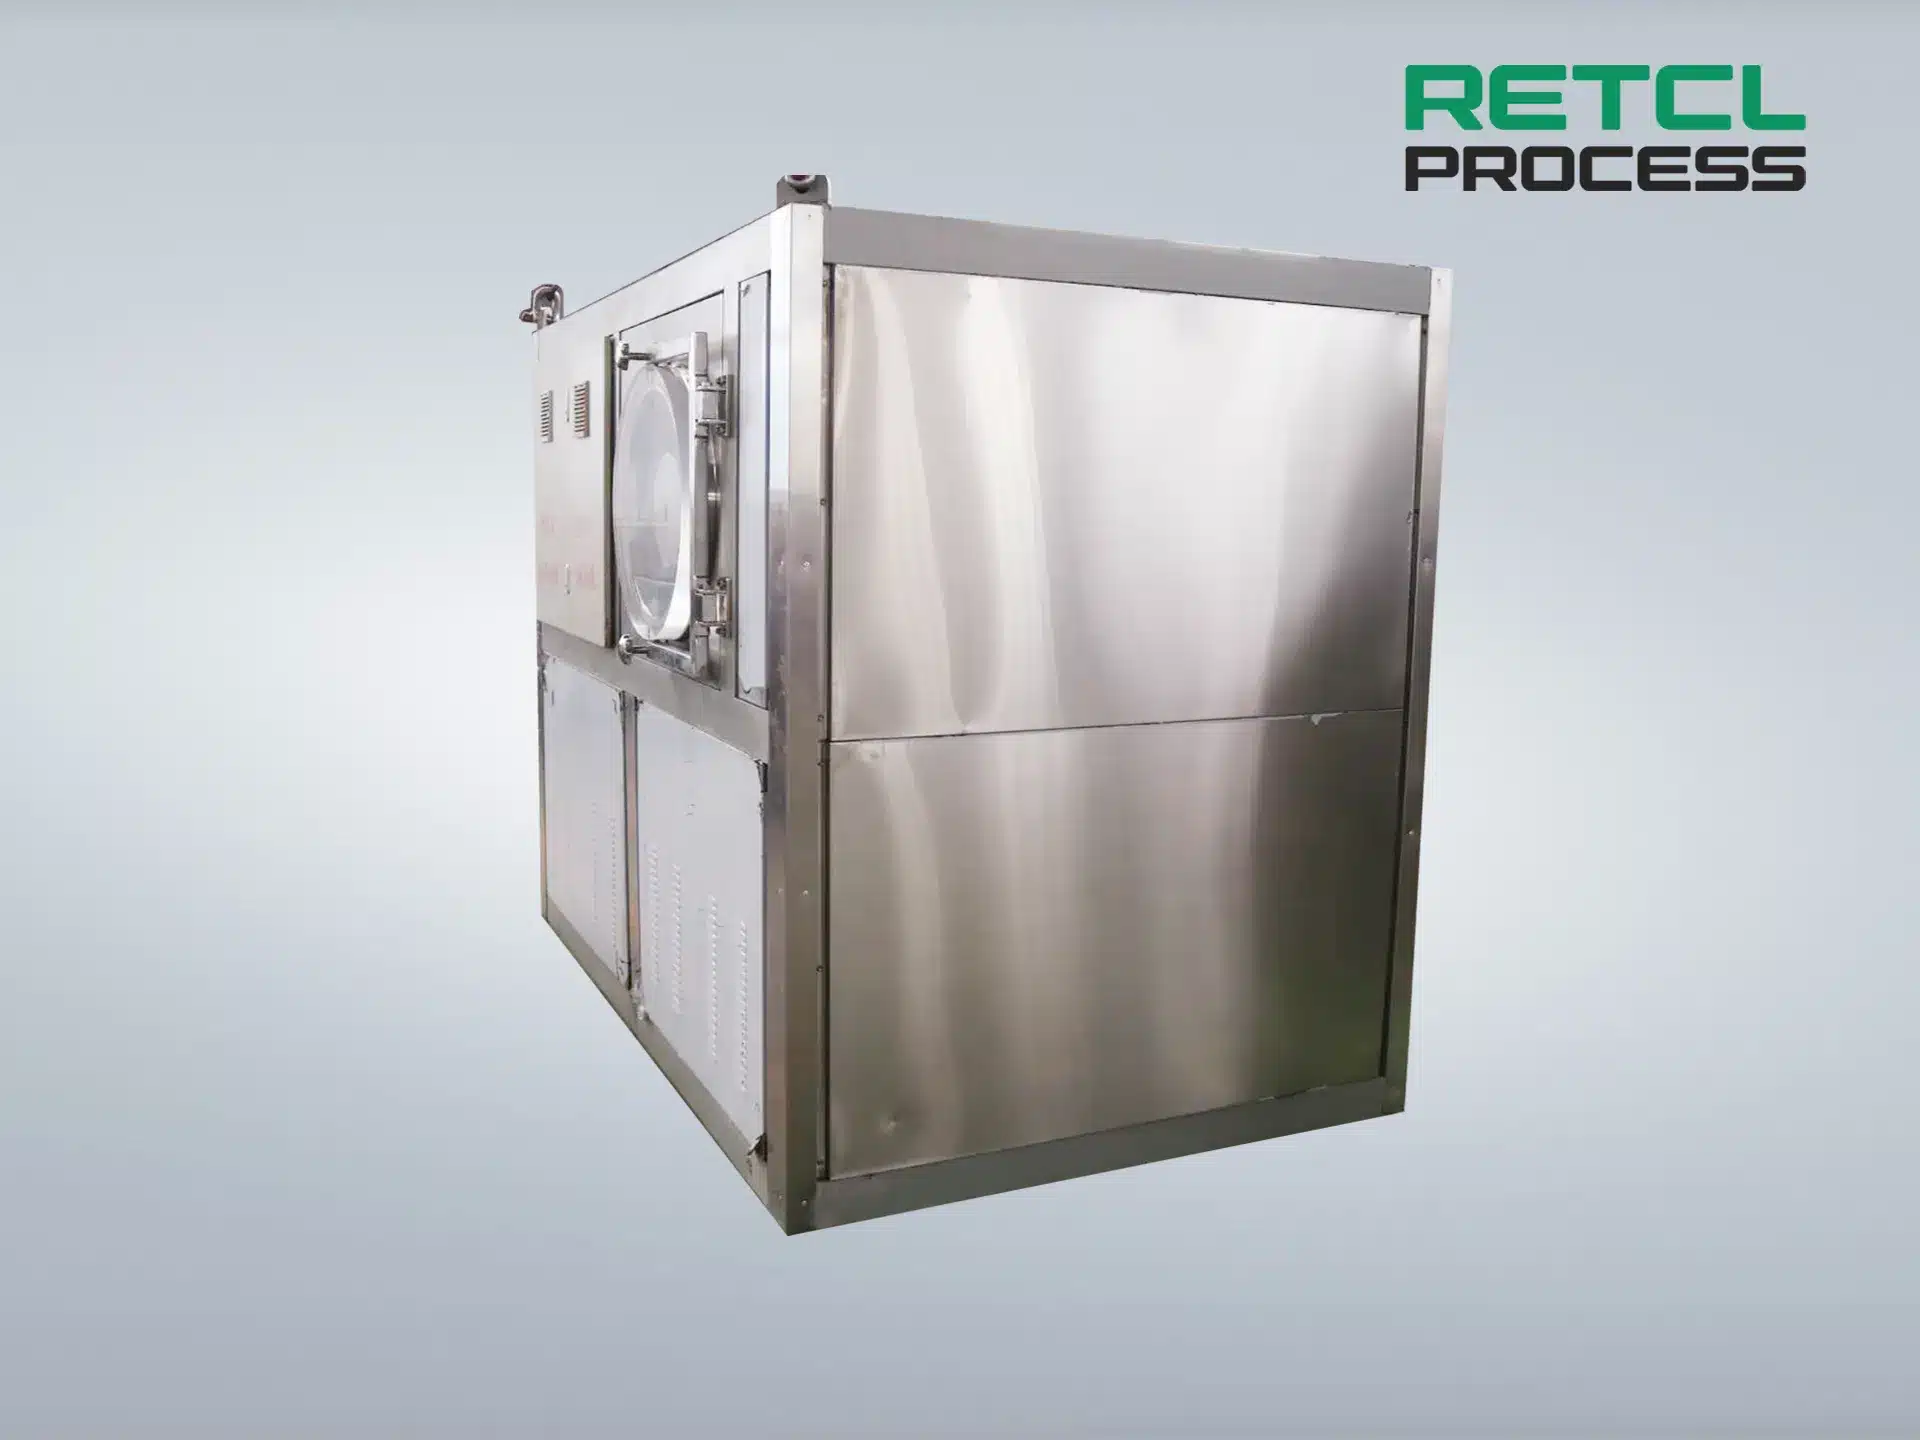 Stainless steel cabinet freeze dryer unit for pharmaceutical processing